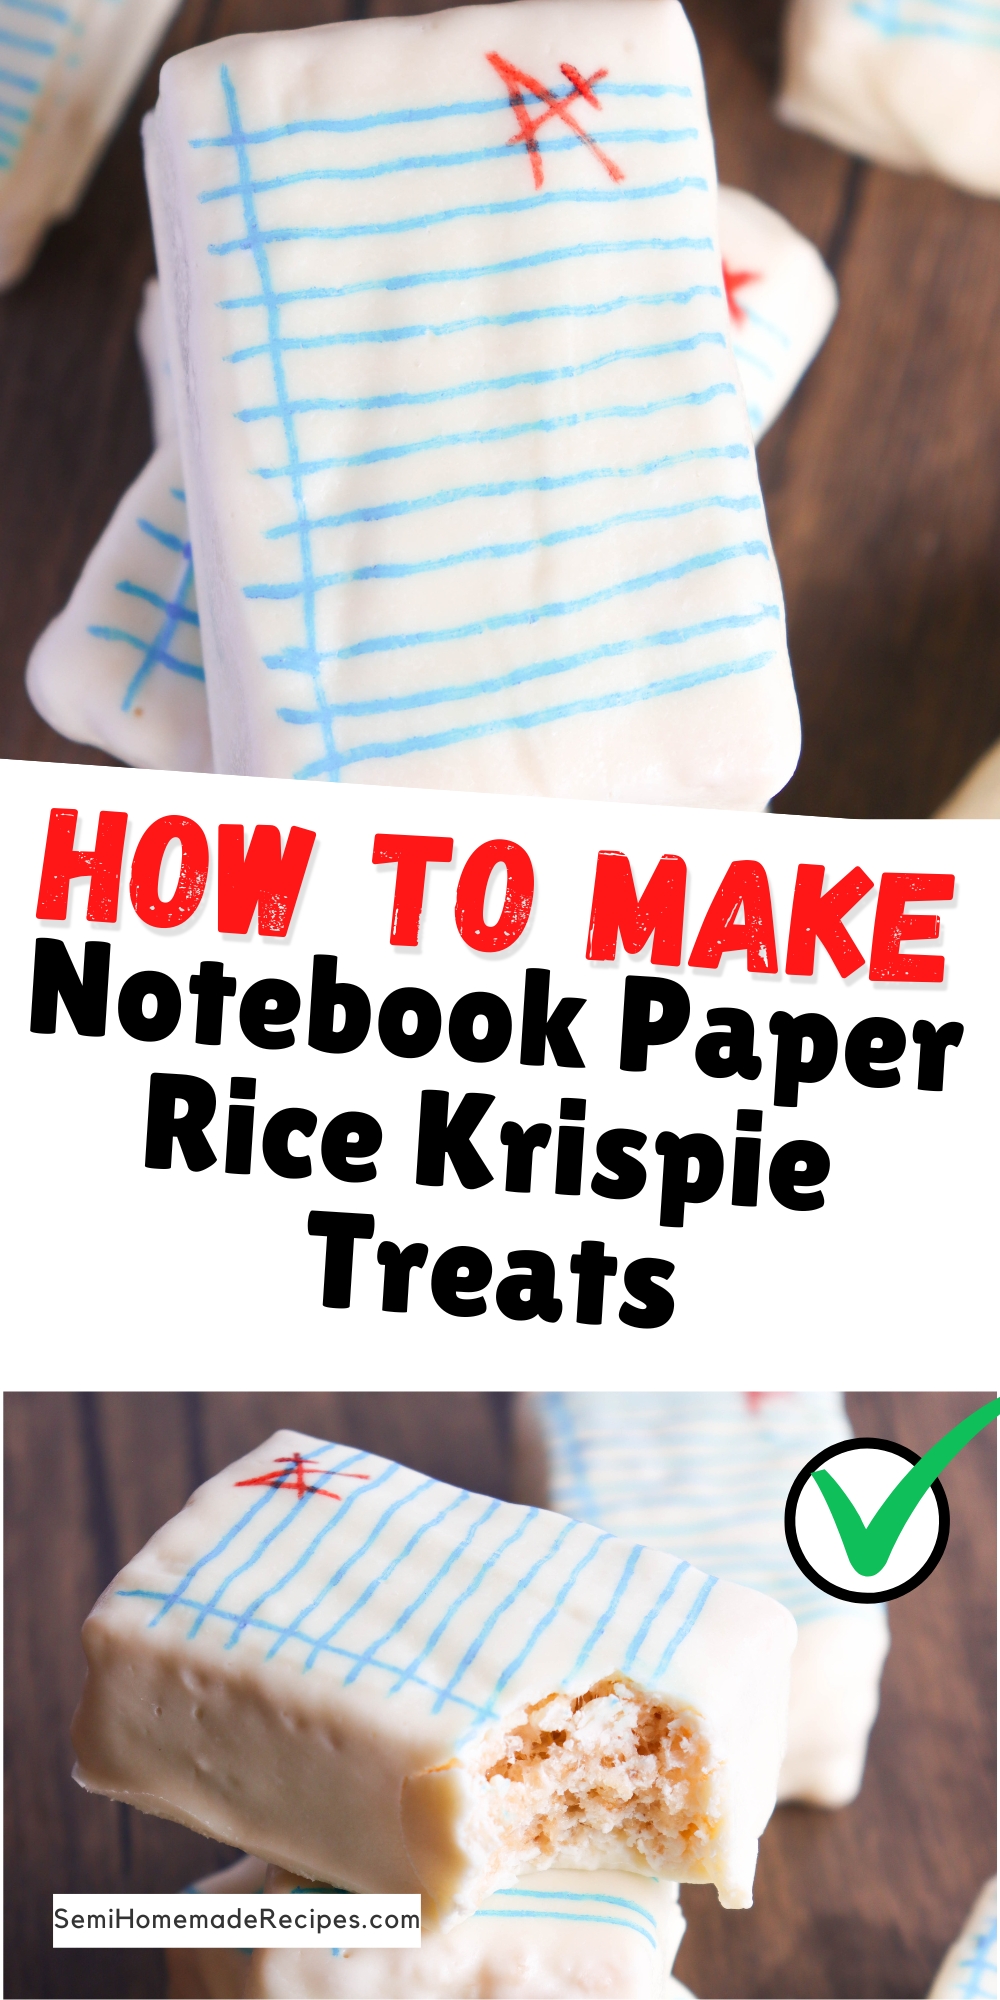 Time to get back into the swing of things because school is back in session! These Notebook Paper Rice Krispie Treats are super cute for teachers and students alike! 